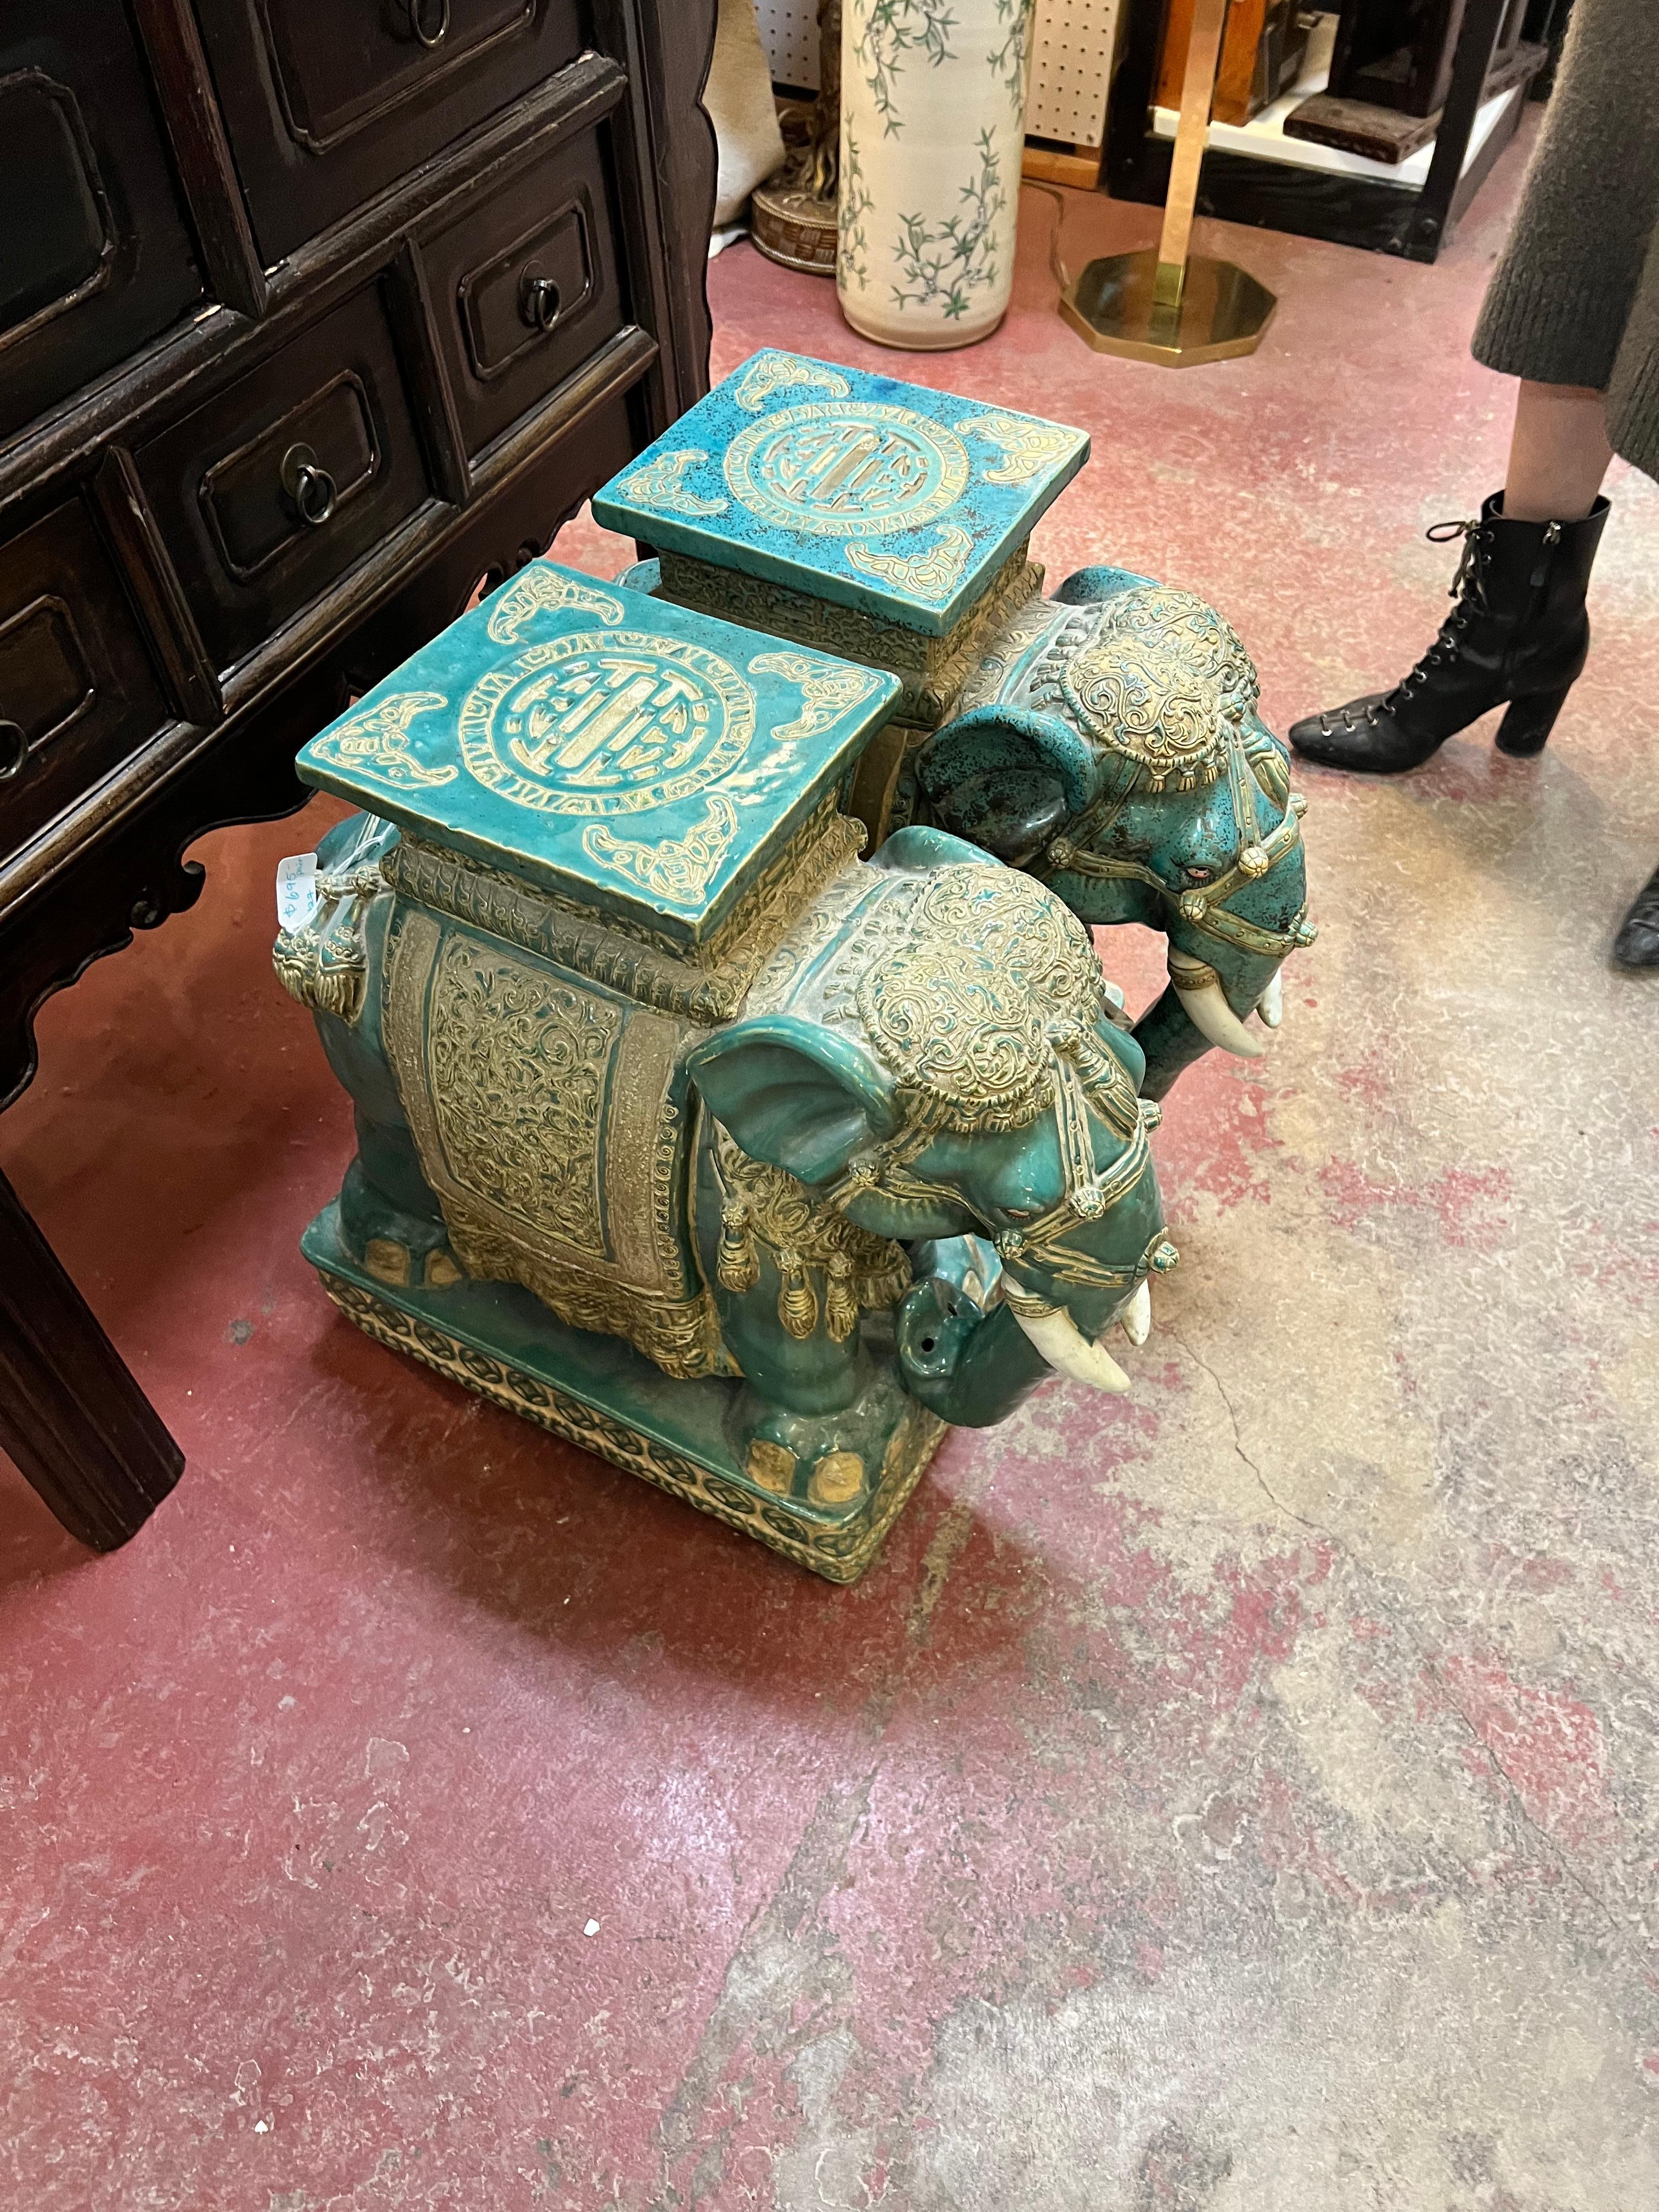 Unusual and rare pair of mid century elephants. Richly patinated in greens and gold, these twin sentries will elevate your gazebo, garden or orangerie. This green blue is a 'lost' color bringing old world charm and eloquence to any space they